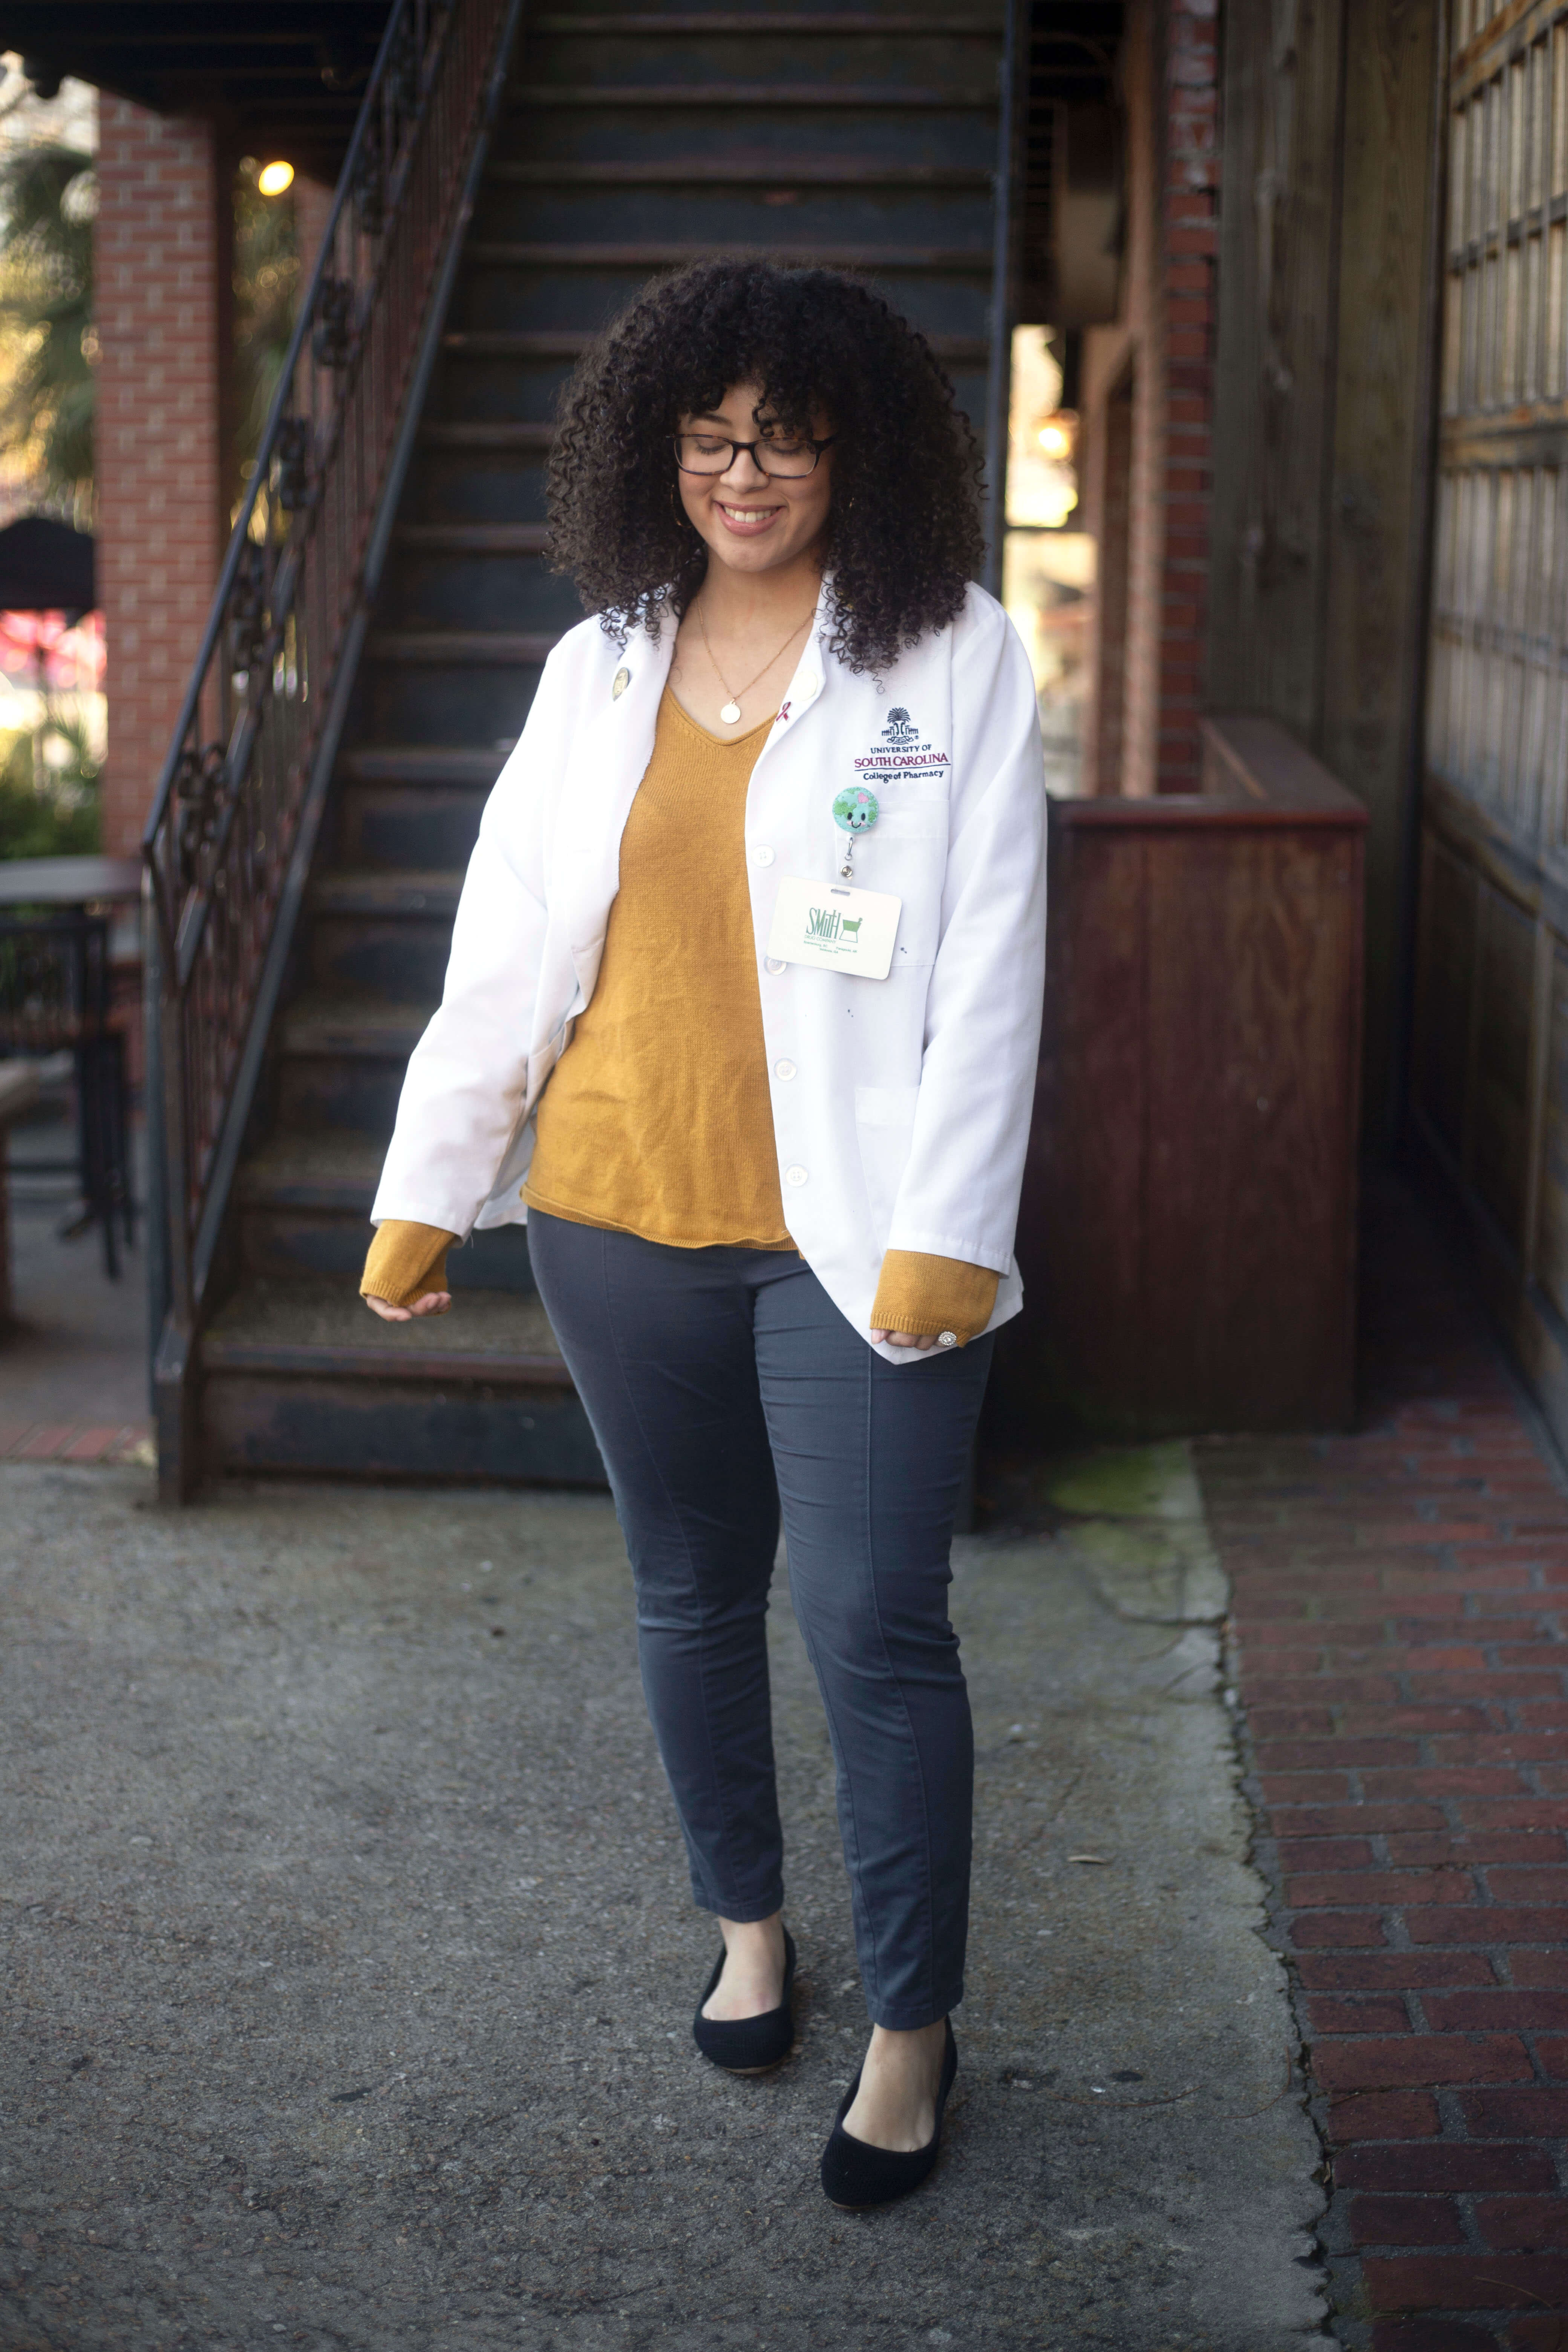 If you’re a pre-pharmacy or just a student interested in pharmacy, read this post before you apply to pharmacy school! I’m sharing 8 lessons that I wish I would’ve learned before I started pharmacy school. 